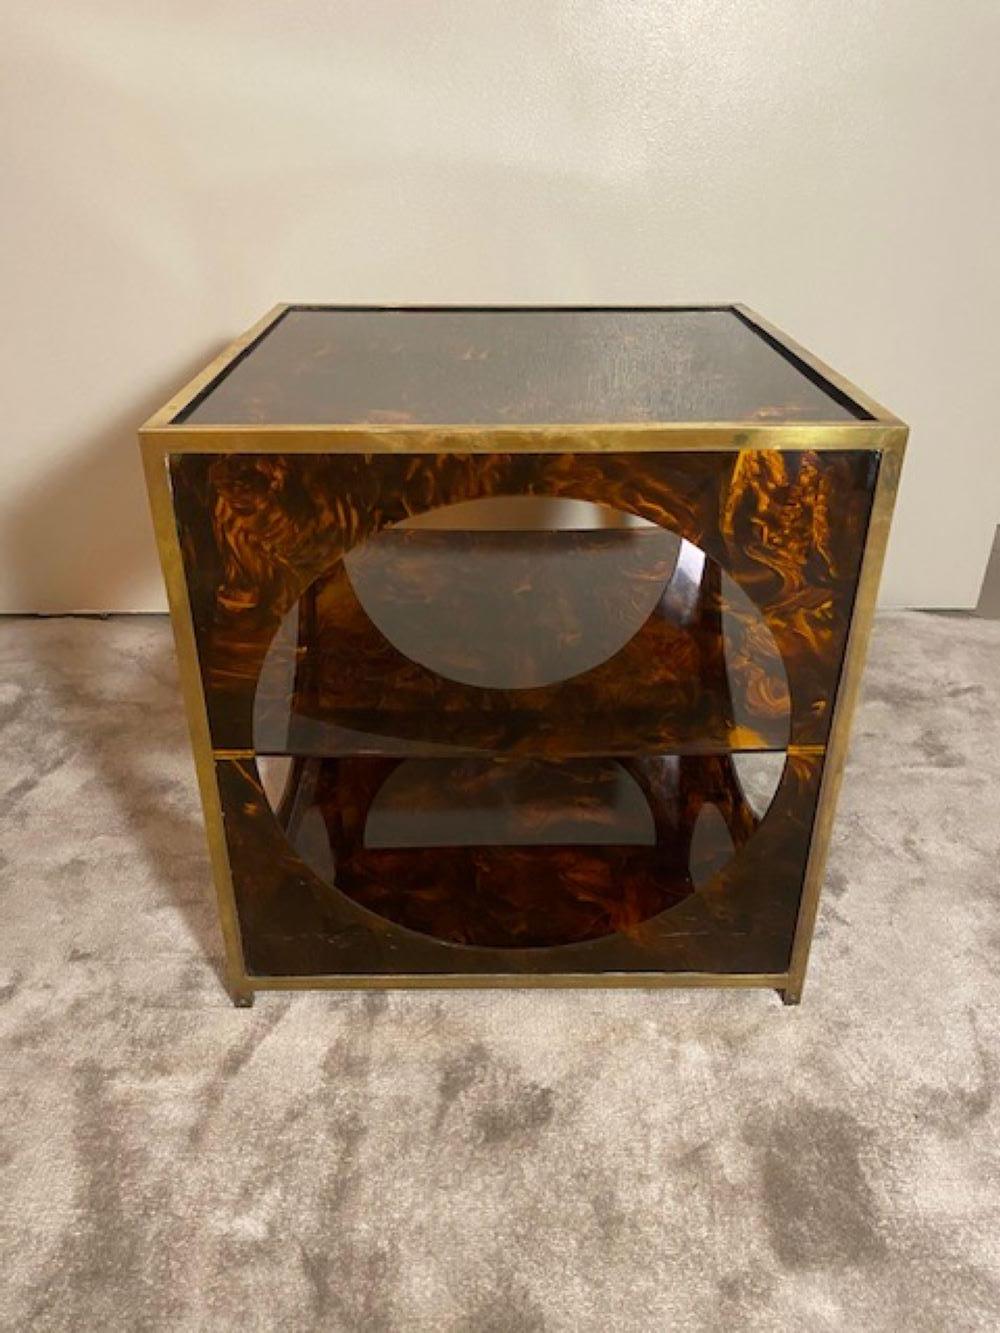 Particular and interesting plexiglass coffee table. The sturdy cube-shaped structure is made of brushed brass with a sheet of plexiglass at the top forms the top of the table, one acts as a base and another is placed in the middle as a support